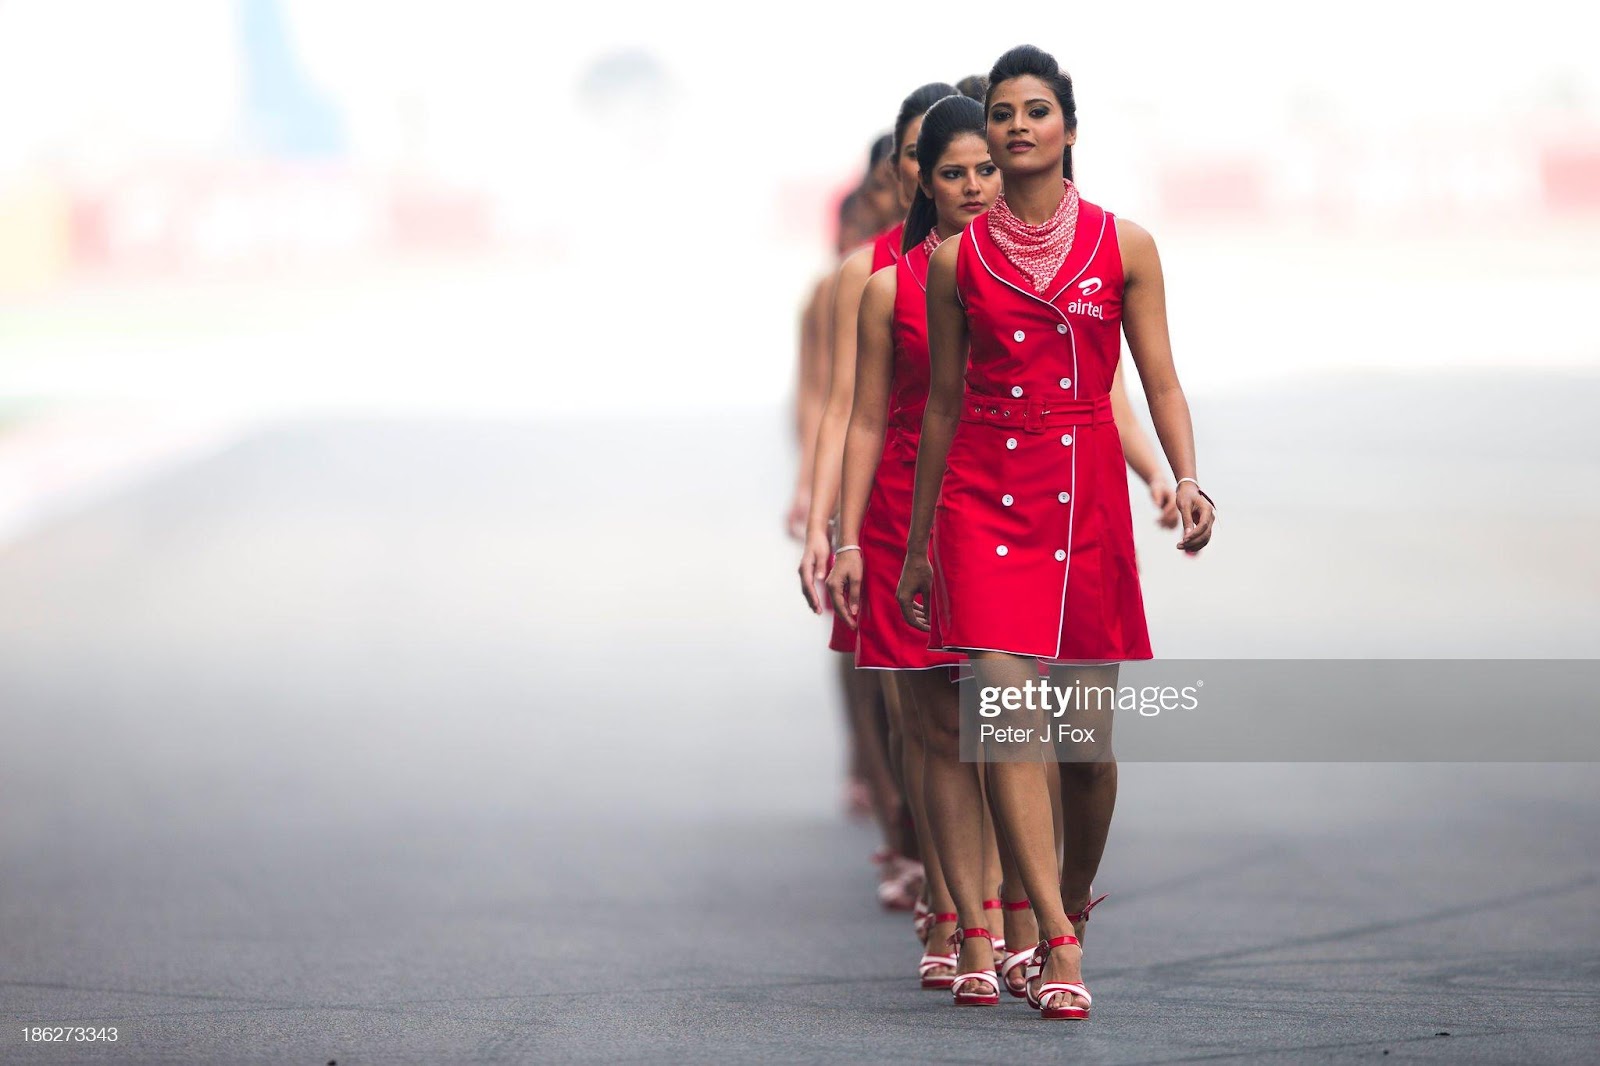 D:\Documenti\posts\posts\Women and motorsport\foto\Getty e altre\grid-girls-walk-on-the-tarmac-during-the-indian-formula-one-grand-at-picture-id186273343.jpg